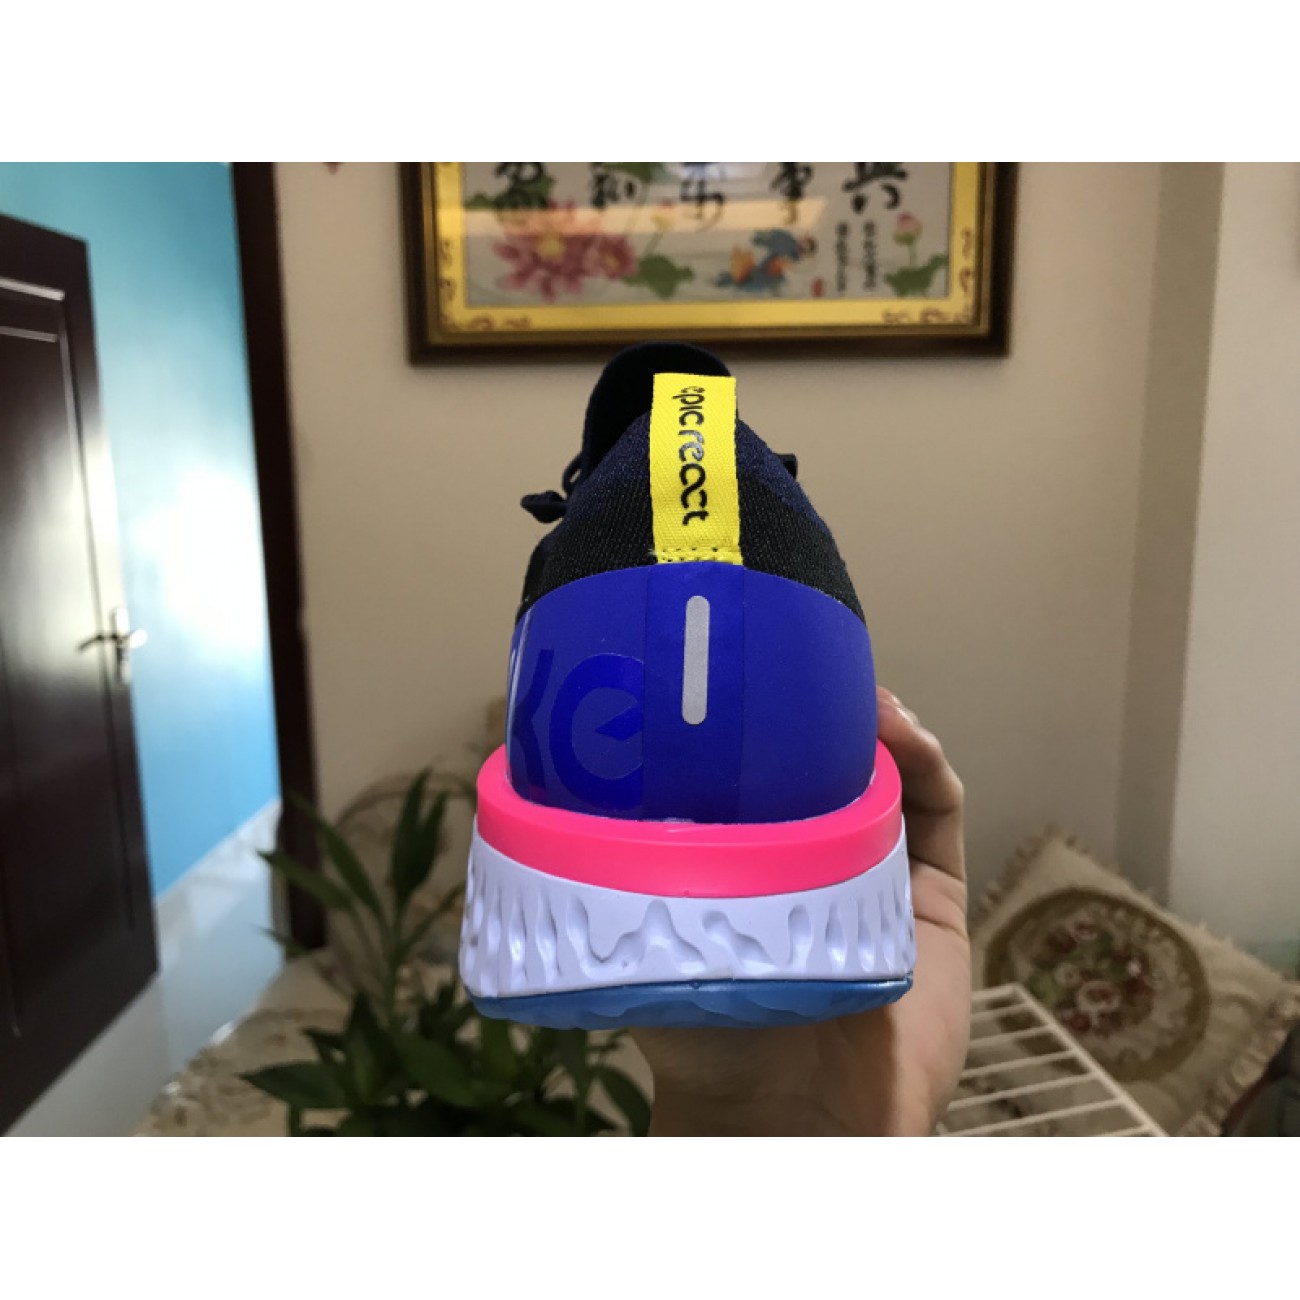 Nike Epic React Flyknit College Navy Racer Blue AQ0067-400